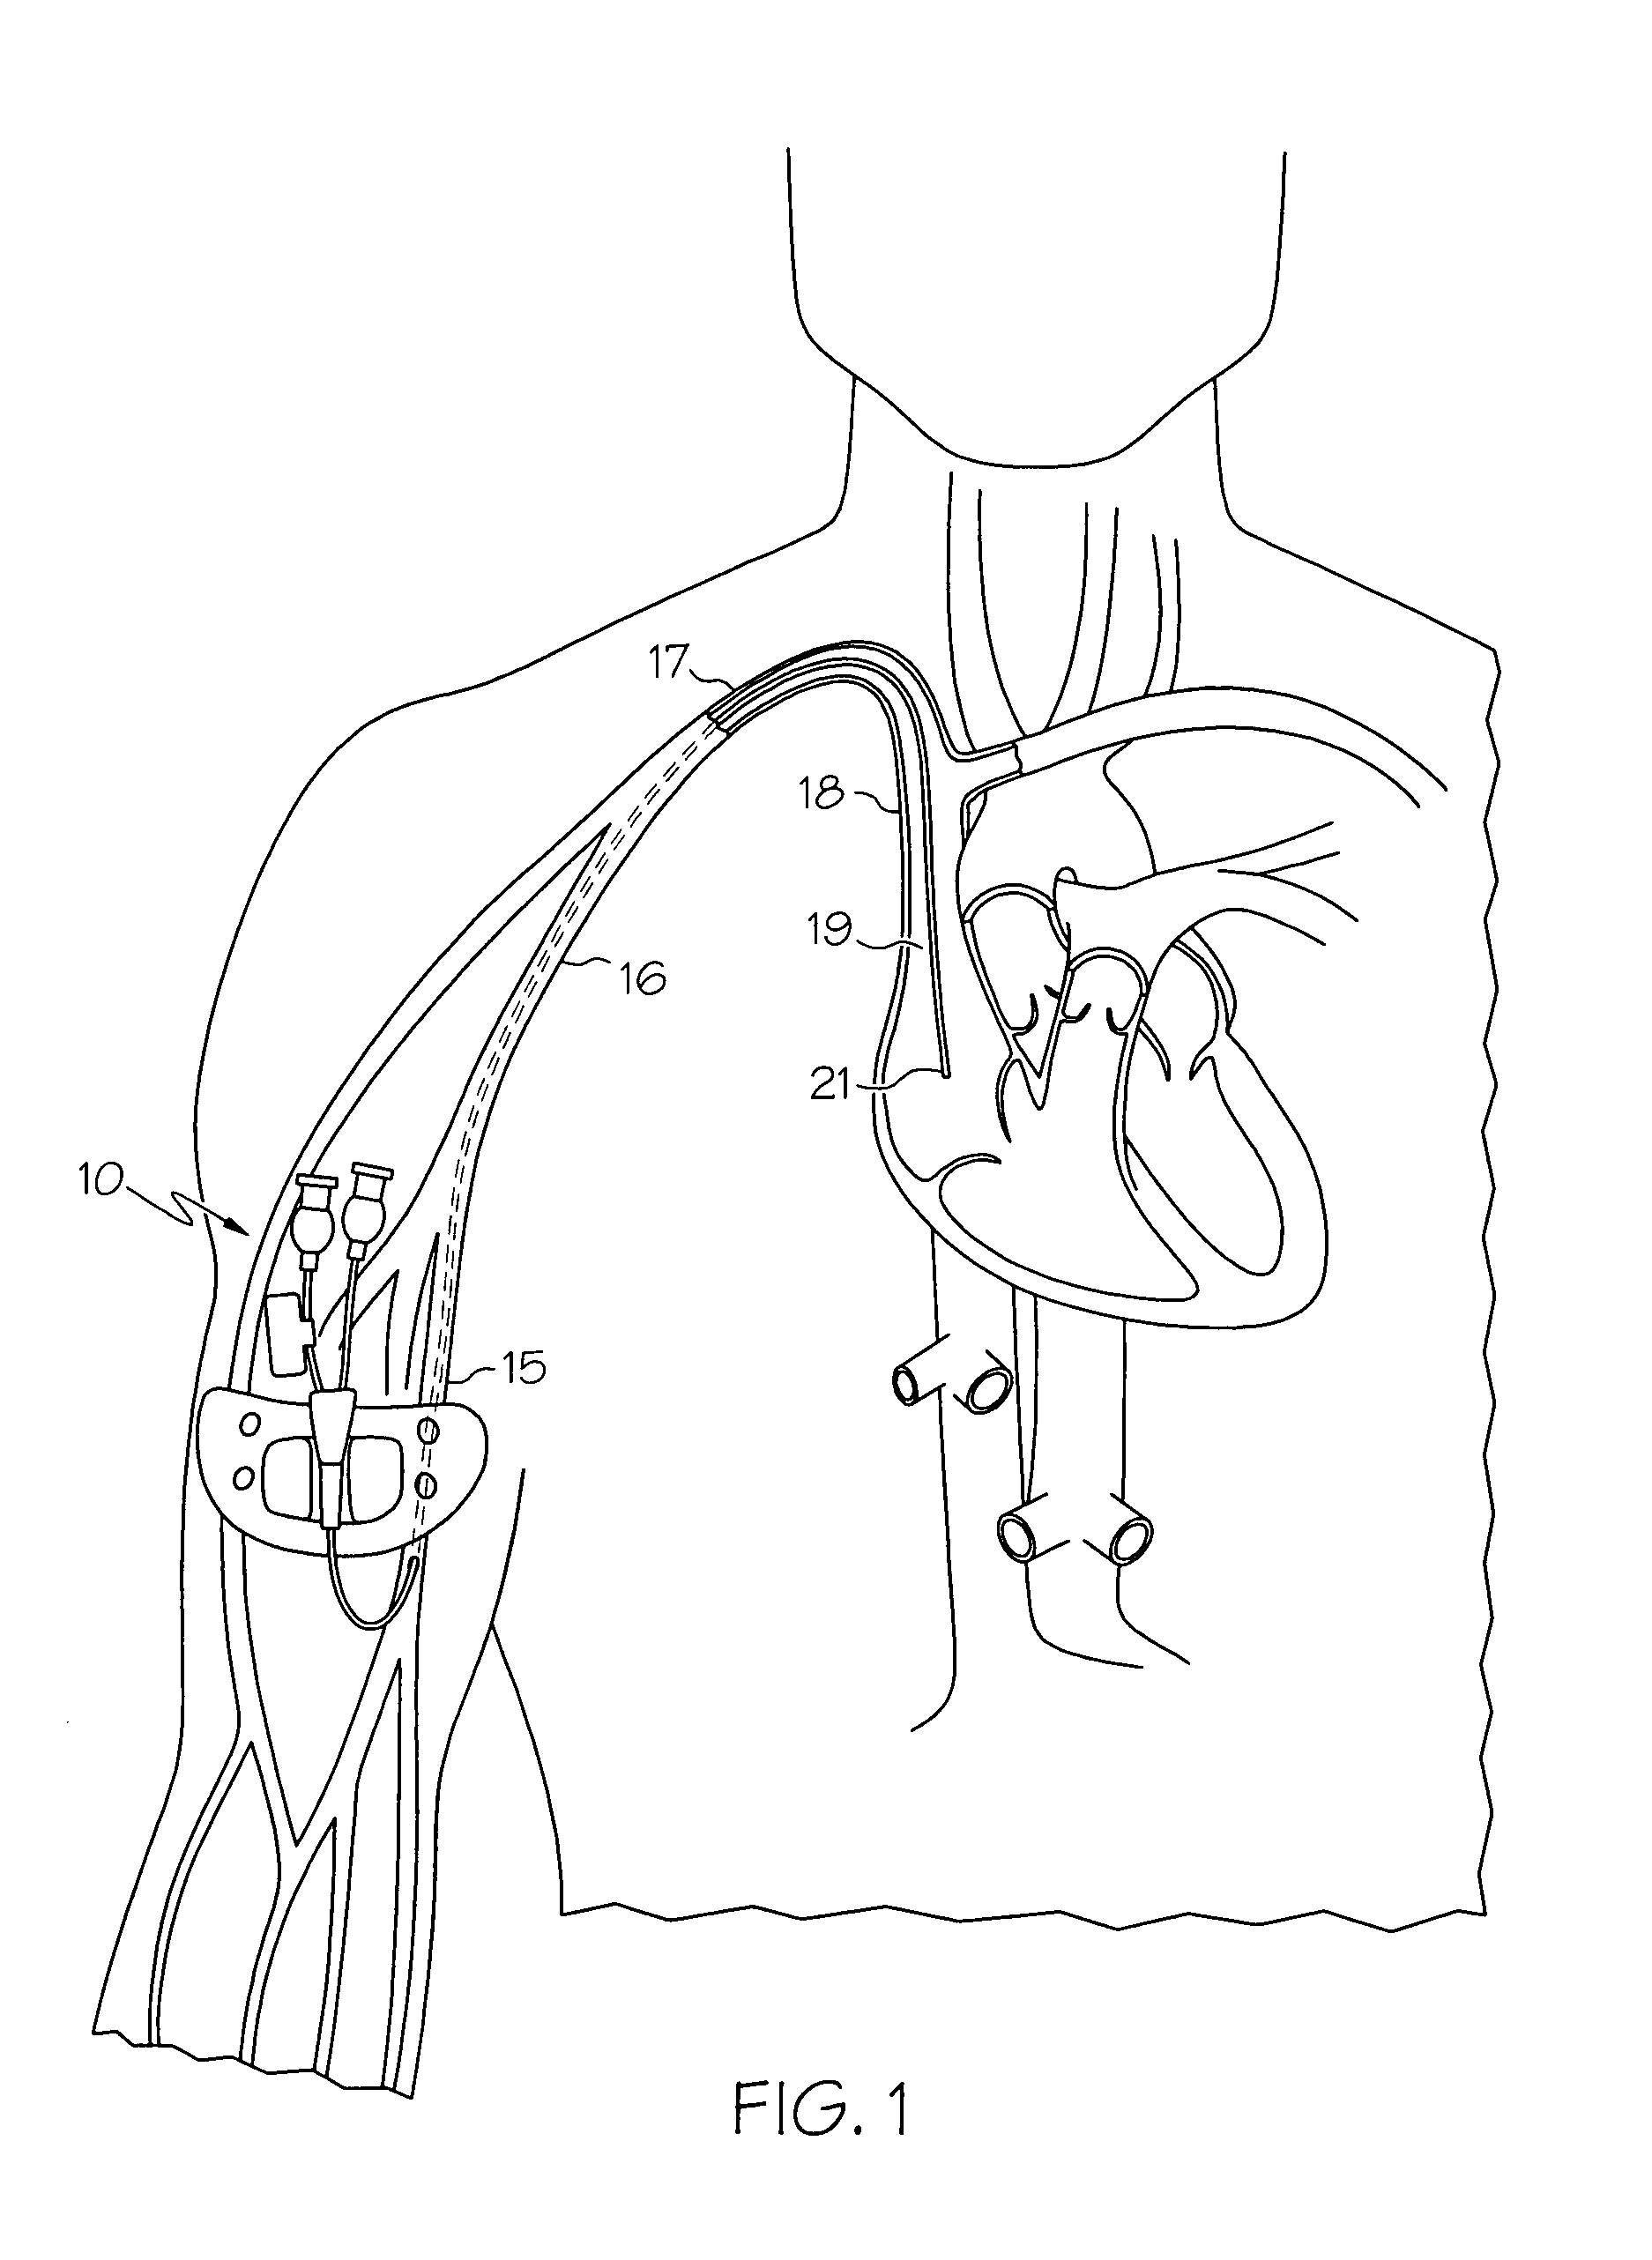 Catheter with position indicator